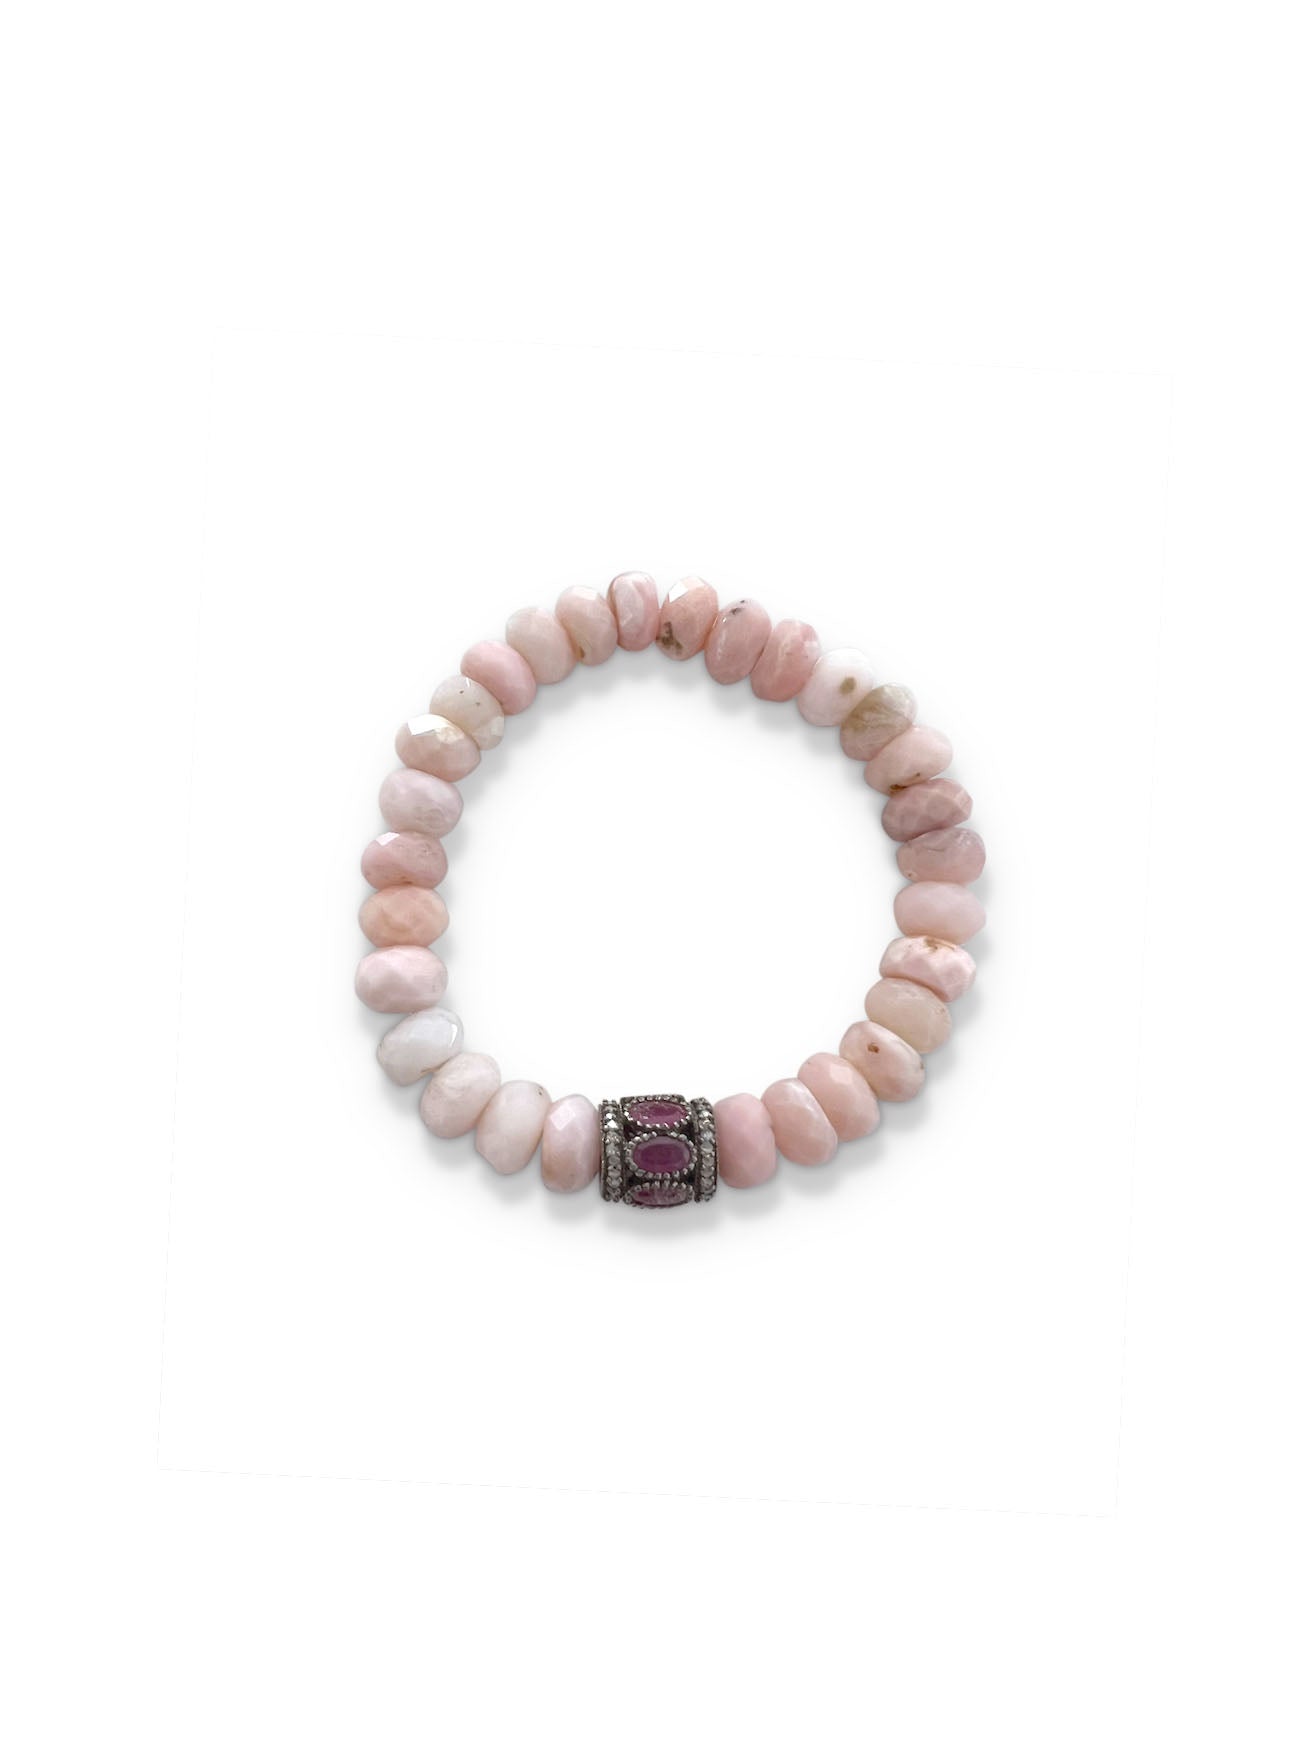 Pink Opal Rondelles with Pave Diamond and Tourmaline Bead set in Sterling Silver